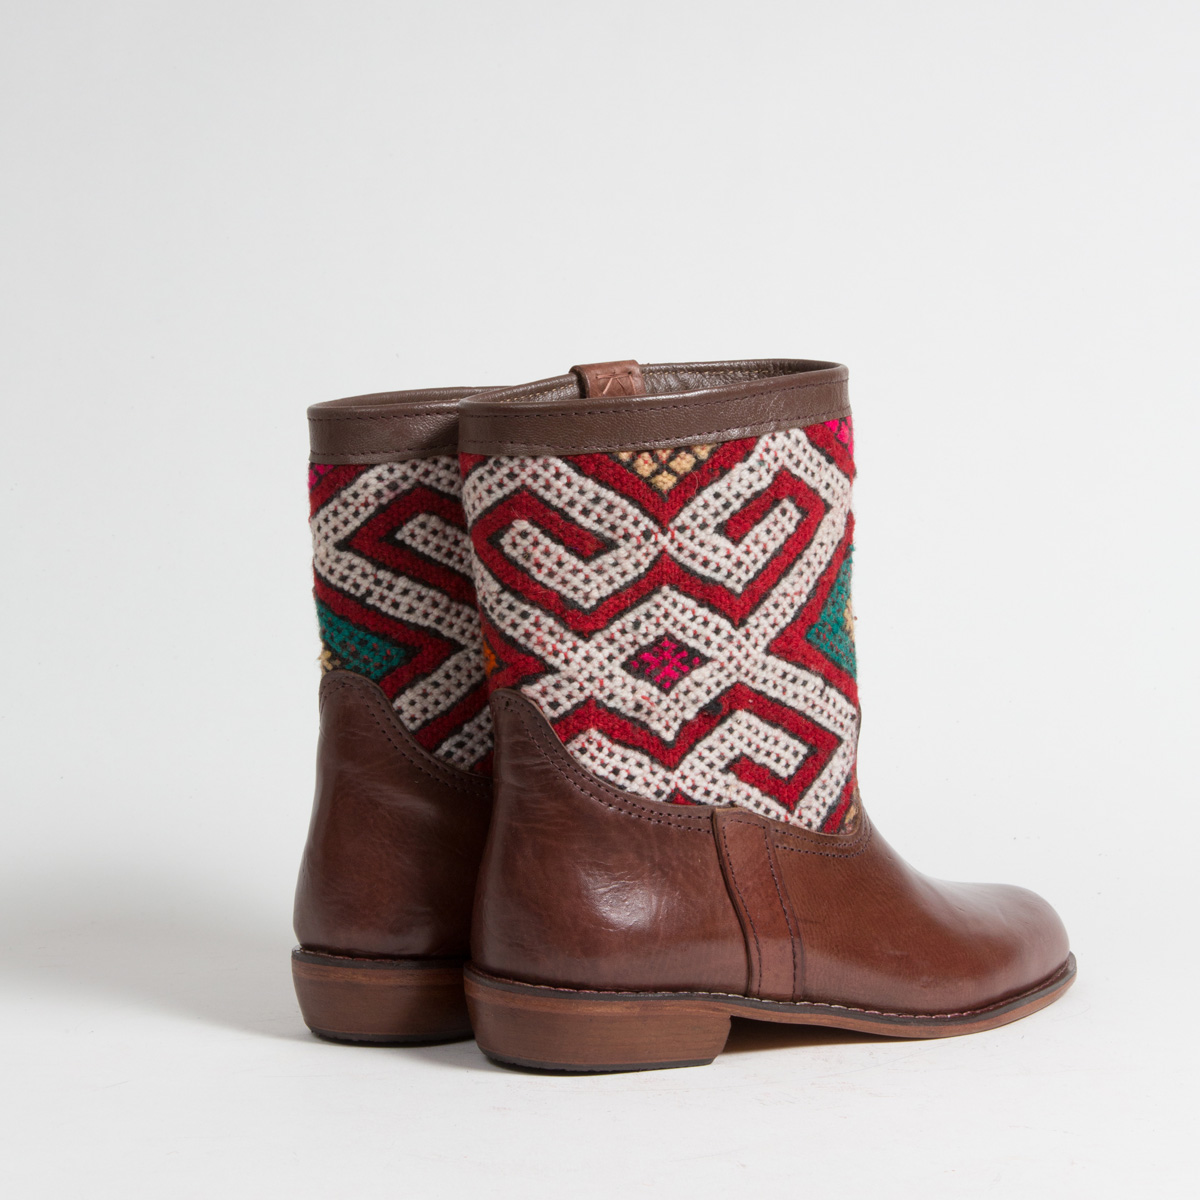 Bottines Kilim cuir mababouche artisanales (Réf. CB5-40)